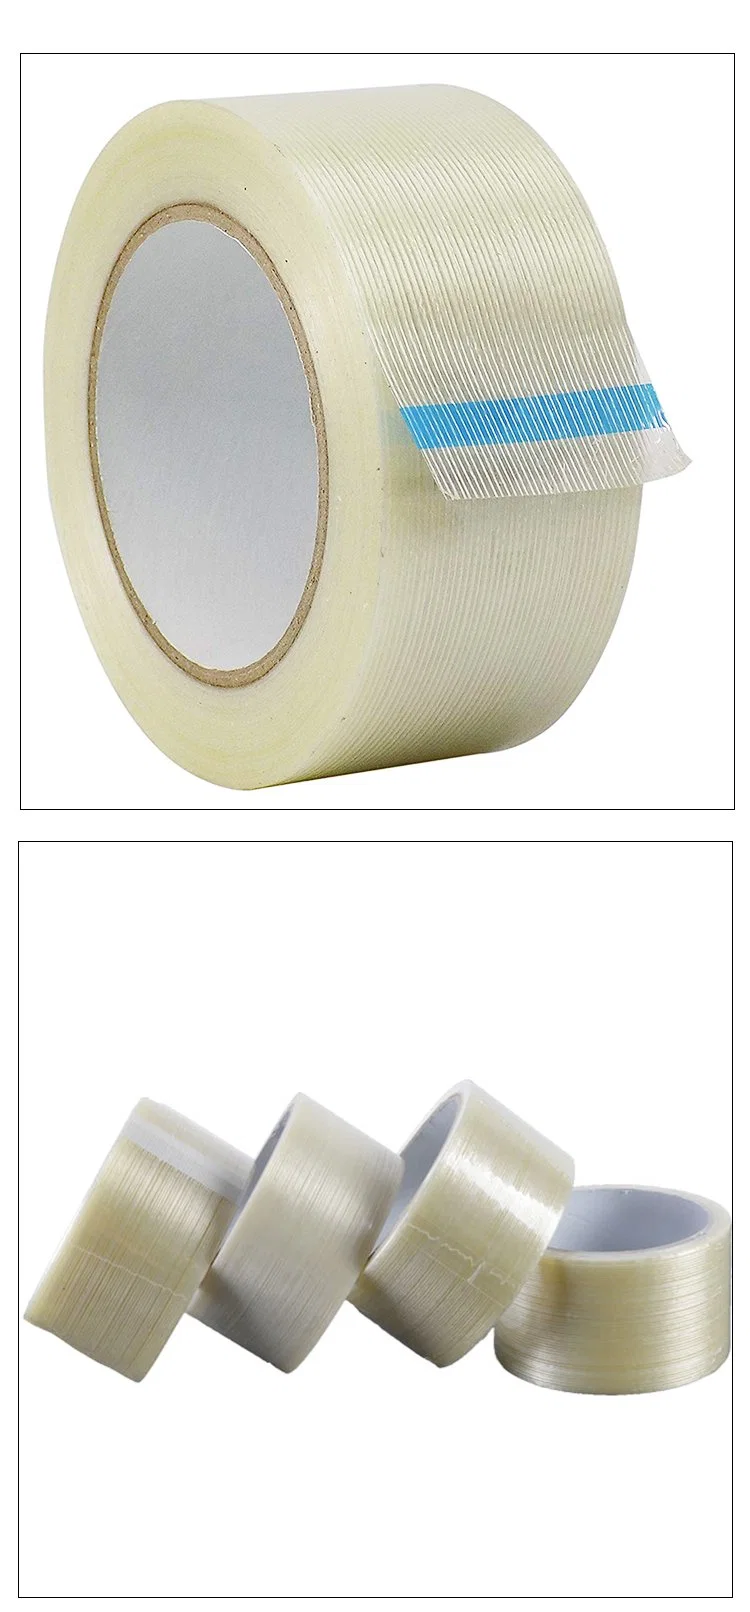 Heavy Duty Filament Fiber Adhesive Strapping Wrap Glass Fibre Reinforced Tape